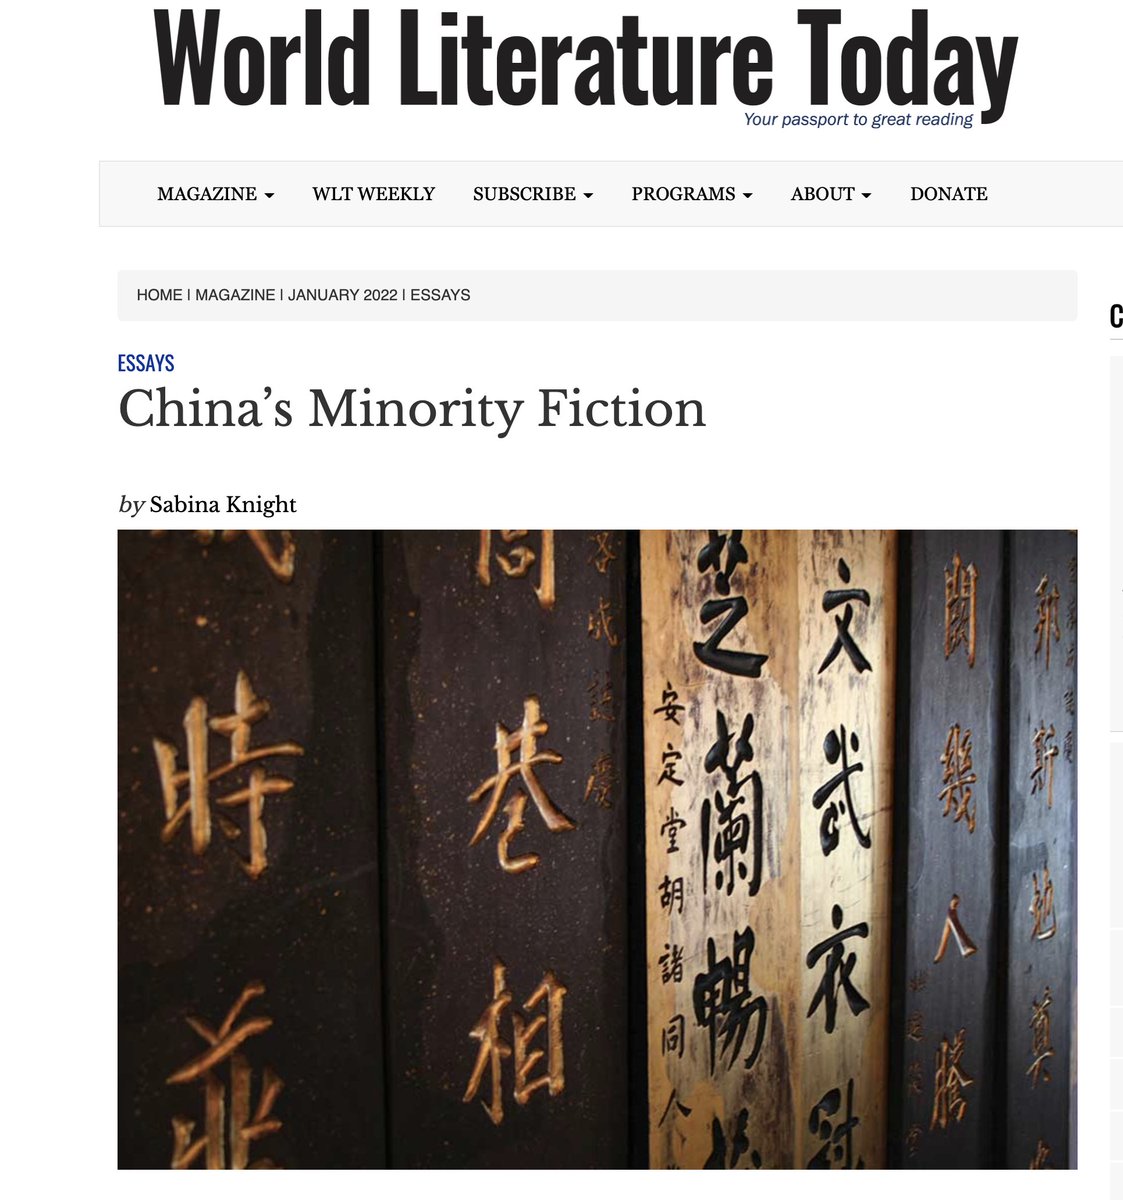 @SabinaKnight1 @jayjamescarter @TNInstitute @yangyang_cheng @dtbyler @nyuniversity @SFU @YaleLawSch @supchinanews @nytimes @VICE @jwassers @PlutoPress 'Dynamic and defiant, #fiction by China’s ethnic #minorities offers clarion voices amid the din of Chinese nationalism . . .' 

'Often lyrical and nostalgic, this fiction documents the pluralism of cultures within #China’s historically shifting borders.' 
worldliteraturetoday.org/2022/january/c…